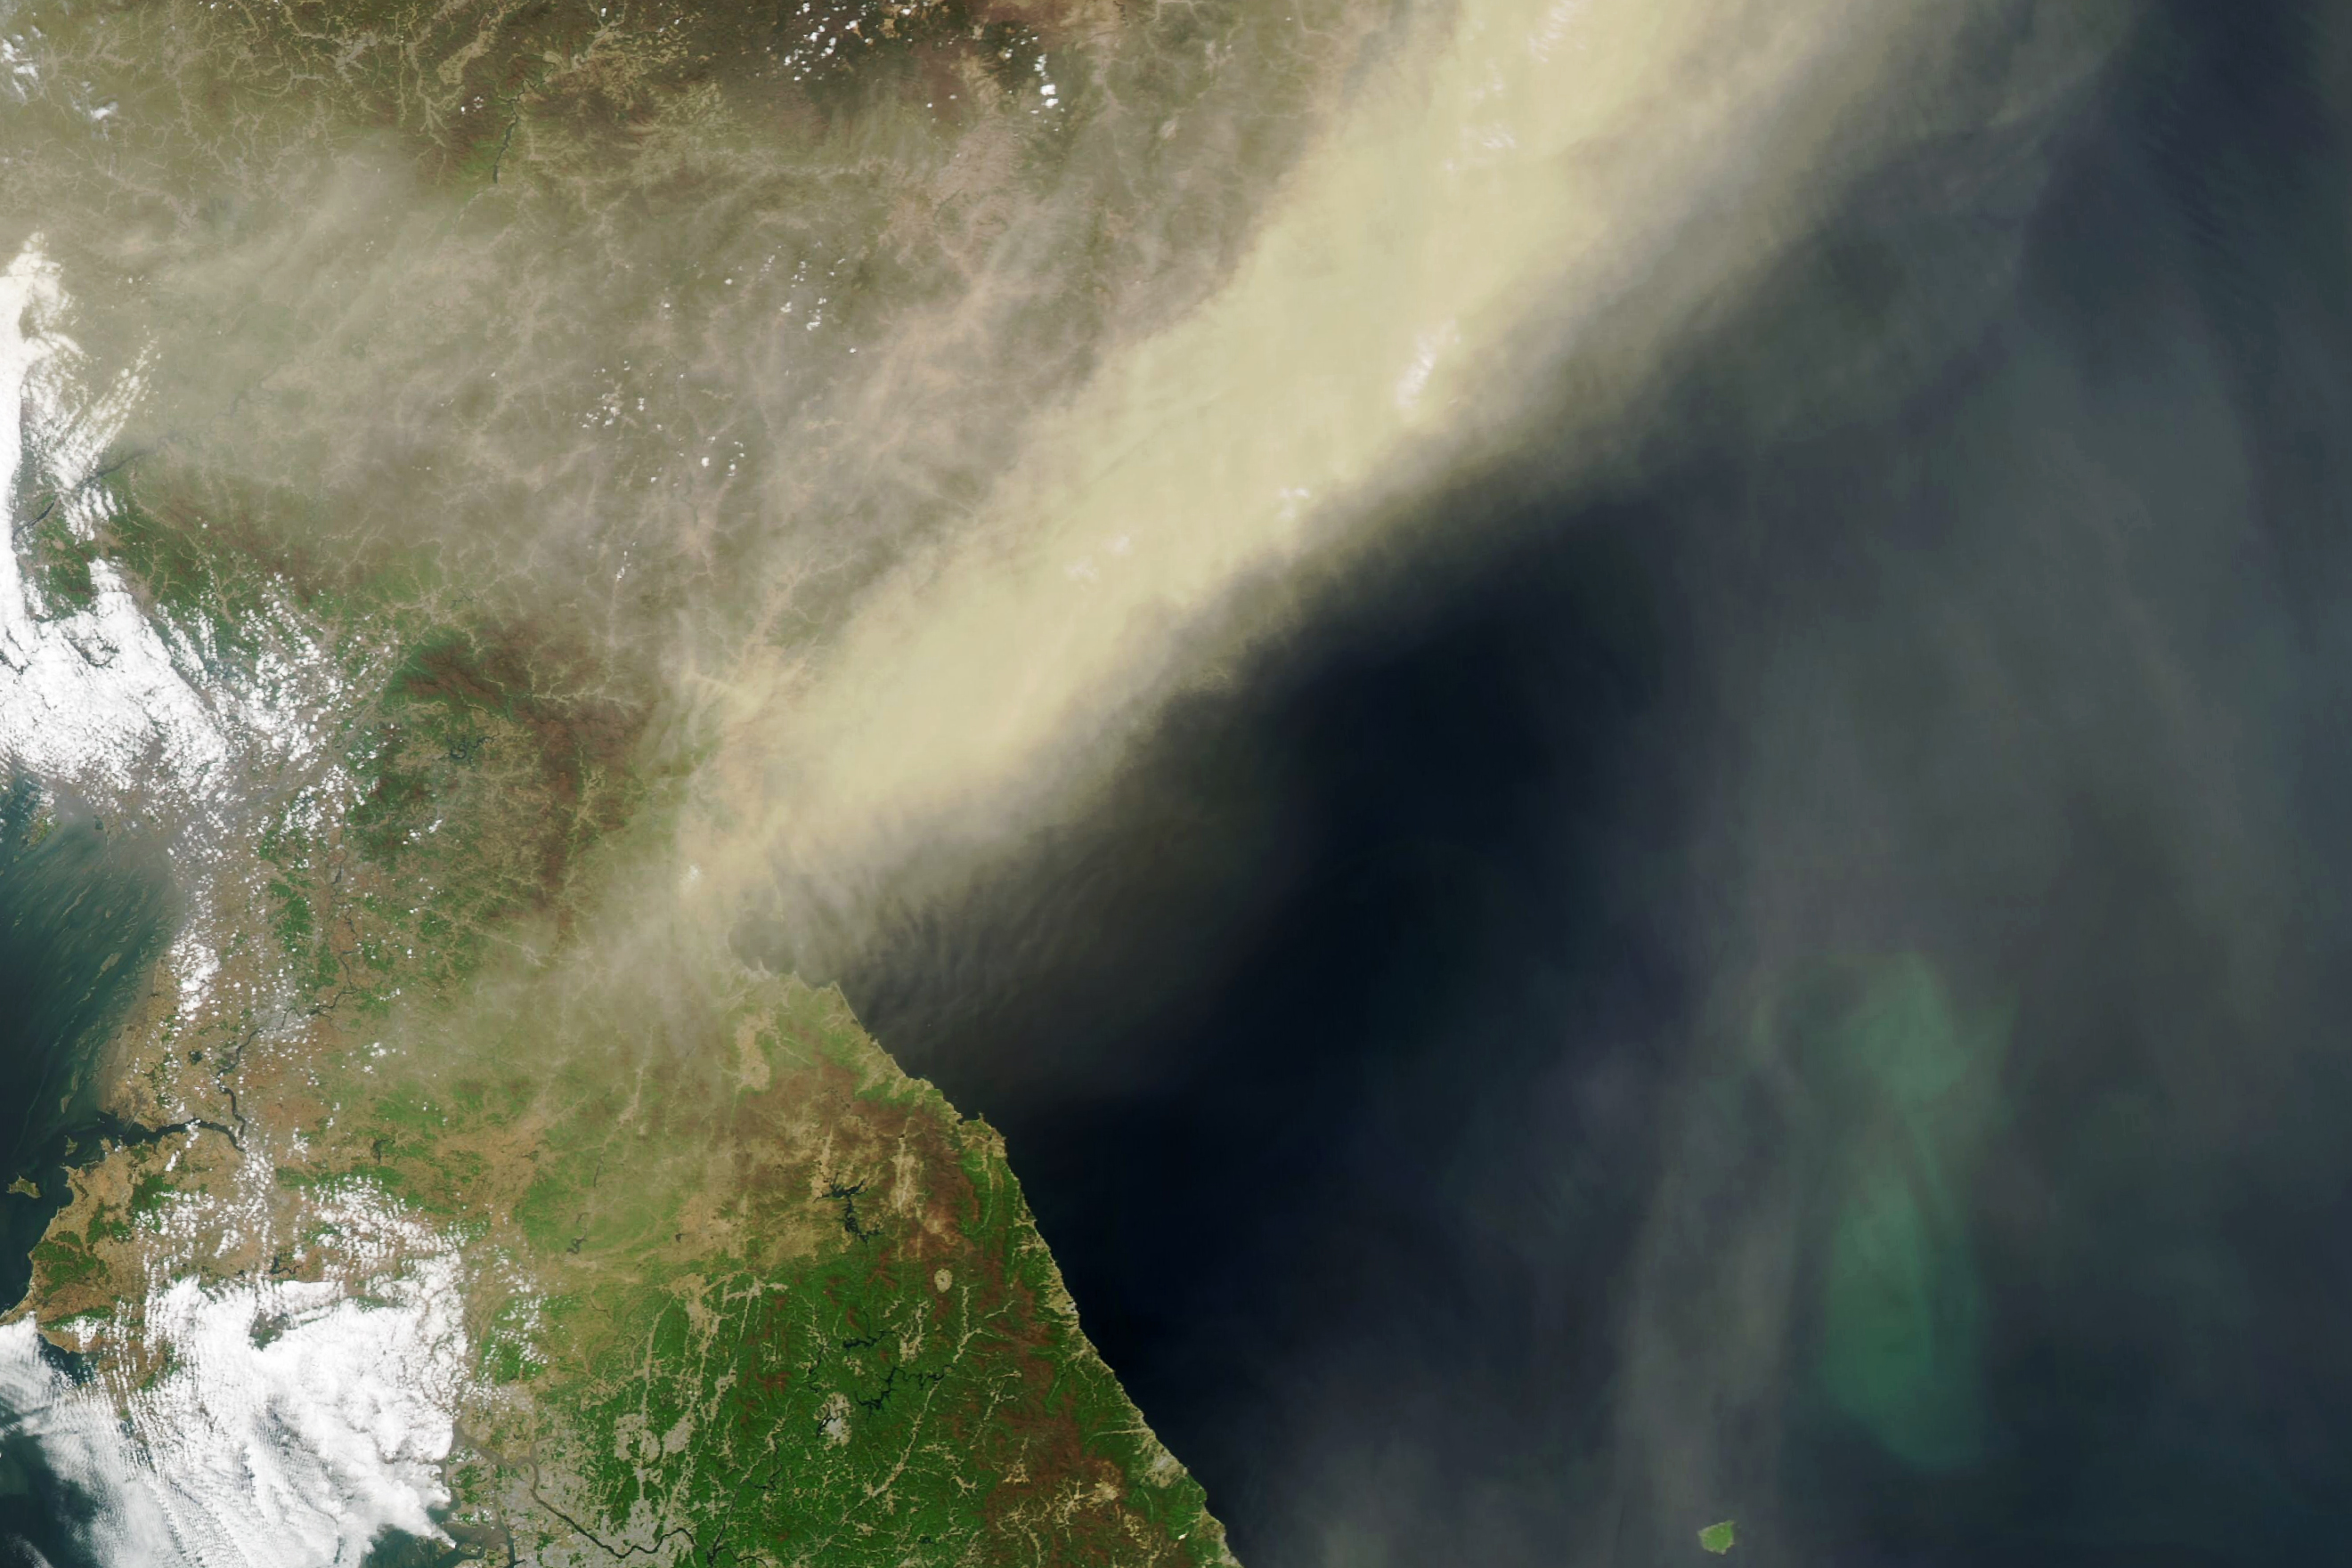 The Korean peninsula (left) shows a beige dust partially obscuring the East Coast of North Korea in this satellite image. An vertically oblong phytoplankton bloom occupies the lower third on the right in the sea of Japan, which is otherwise a dark blue, it is partially obscured by dust.